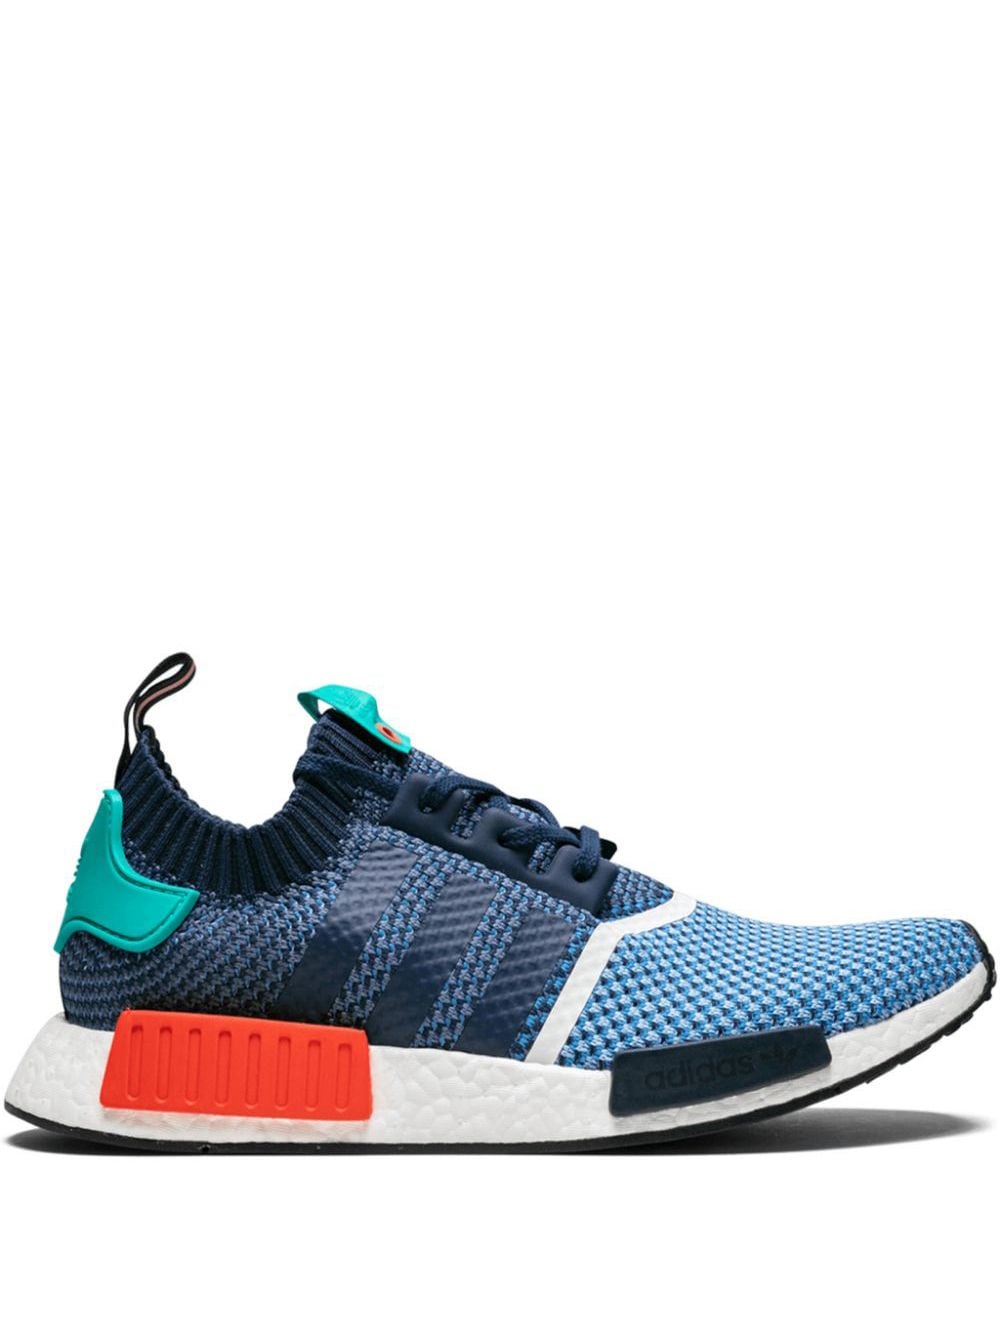 adidas NMD_R1 Primeknit "Packer Shoes" sneakers - Blue von adidas